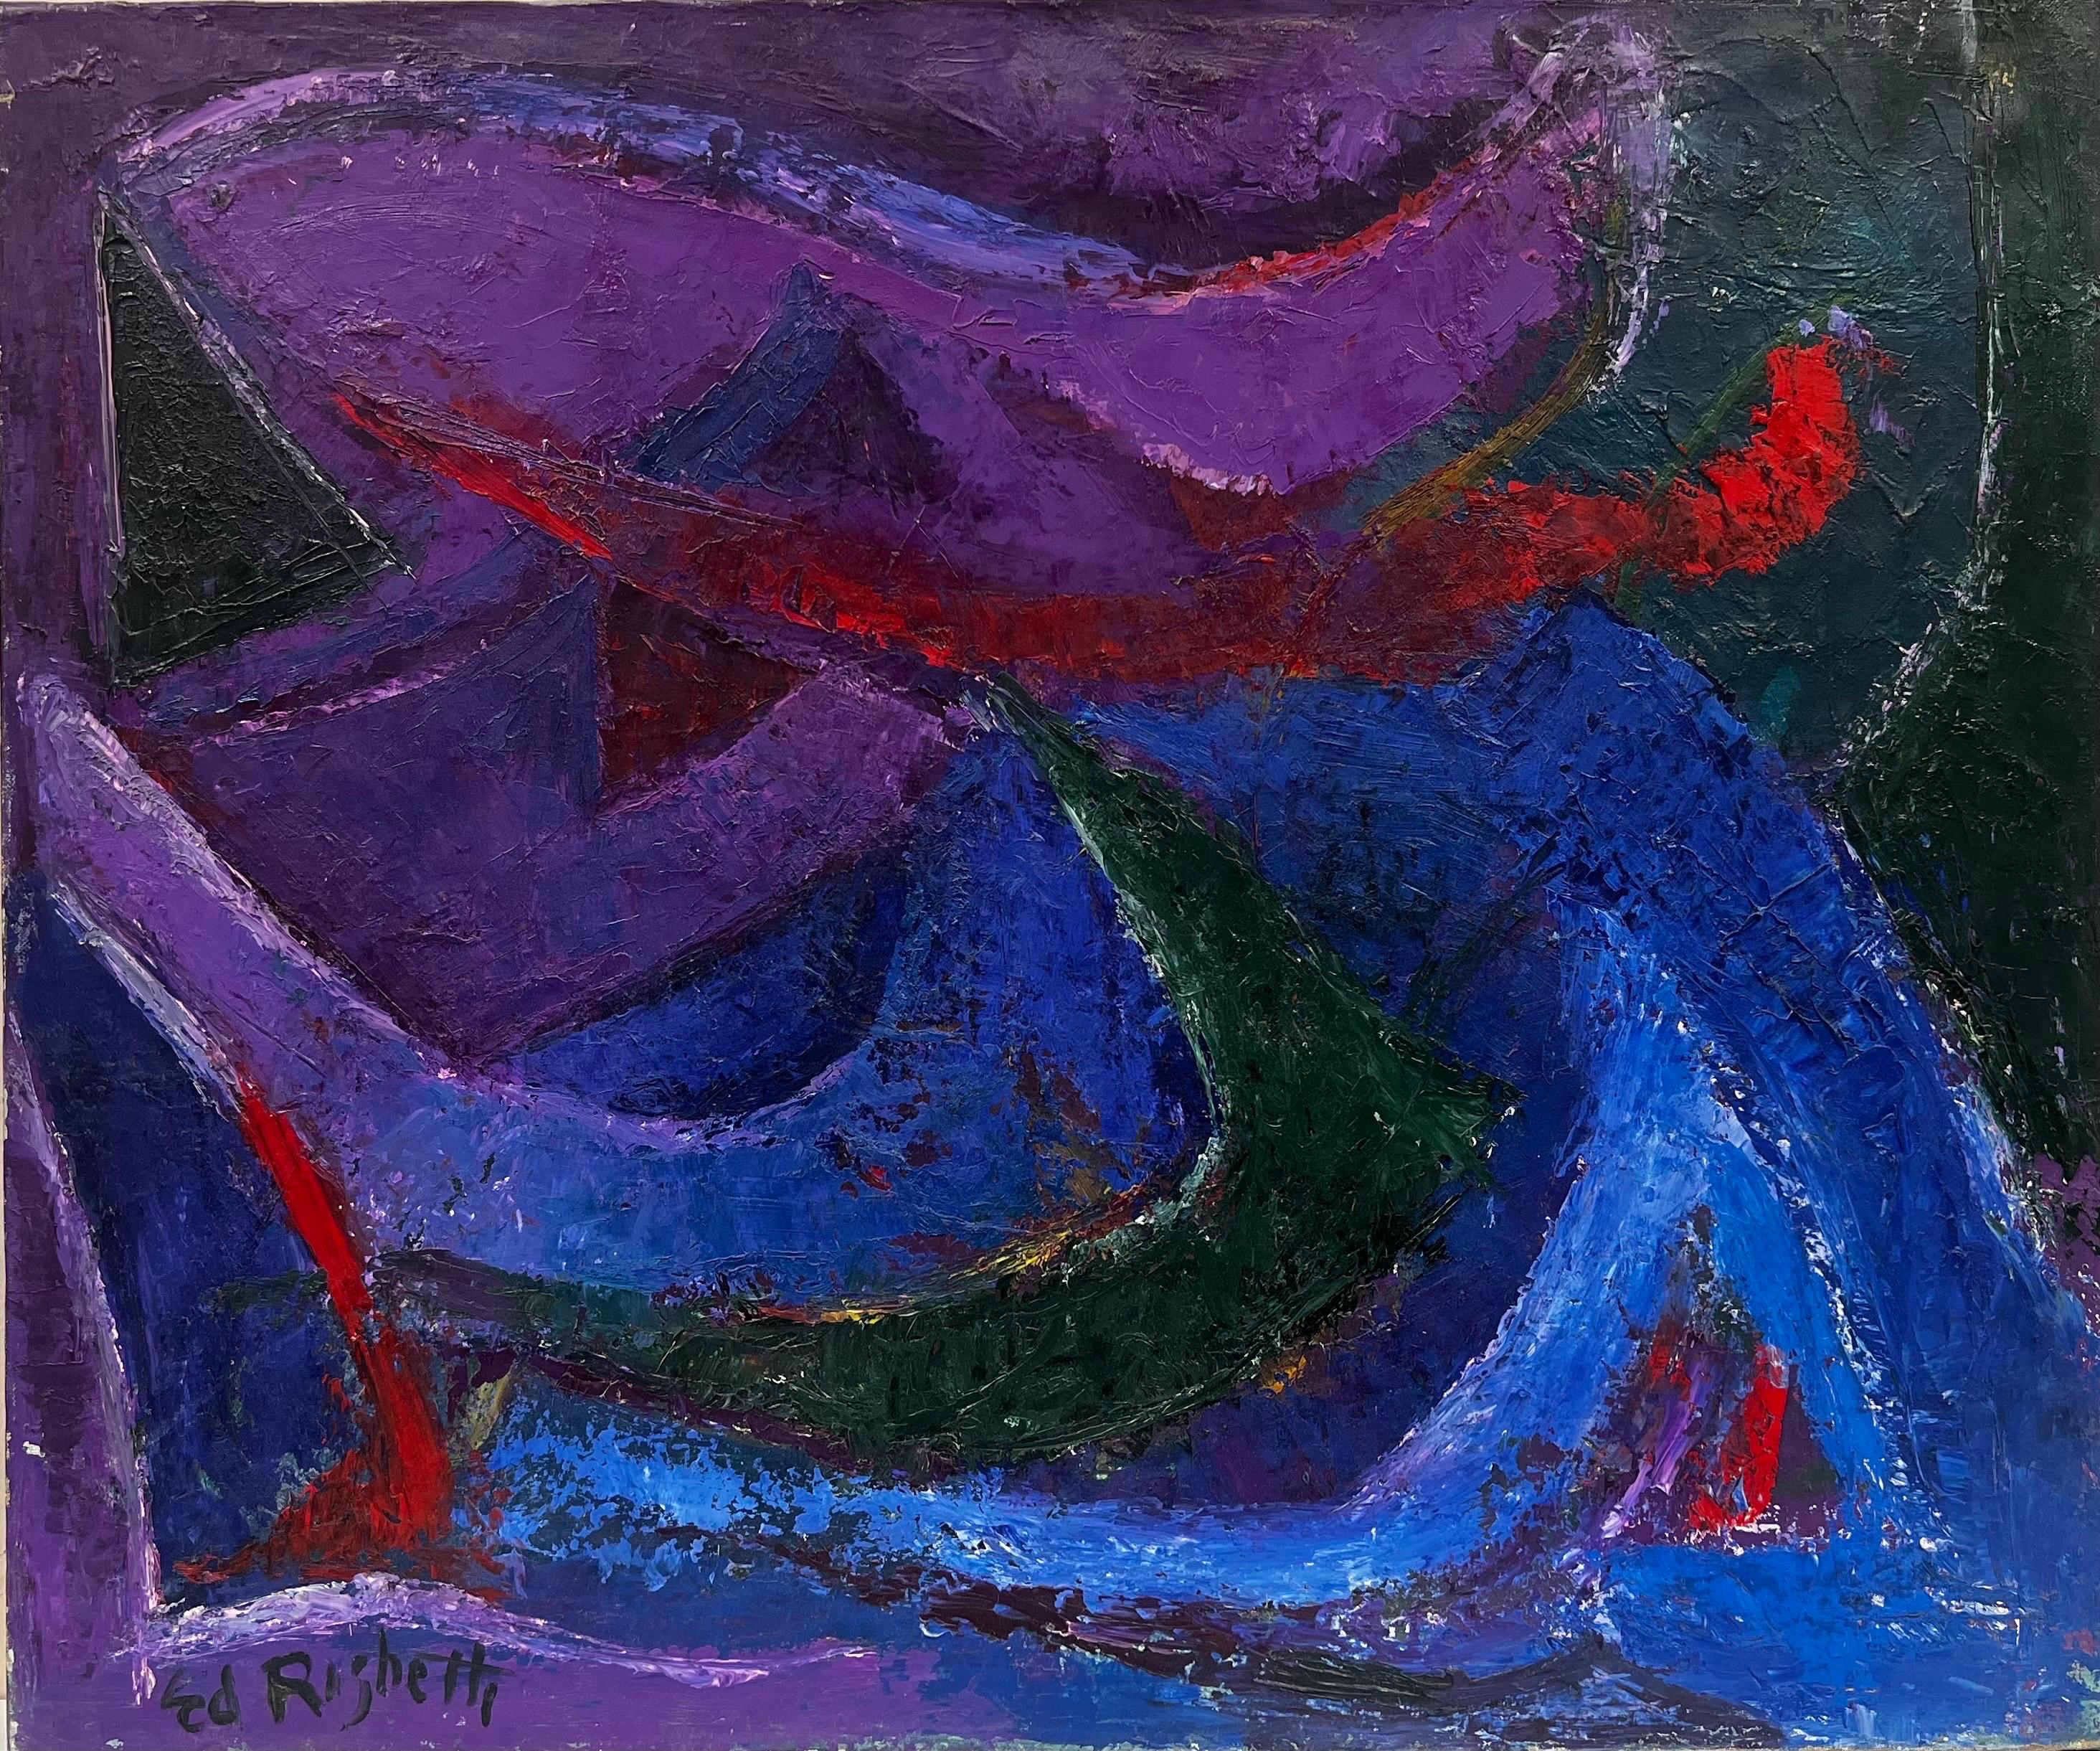 1960s French Bright Abstract Amazing Purple Colors & Composition - Painting by Édouard Righetti (1924-2001)